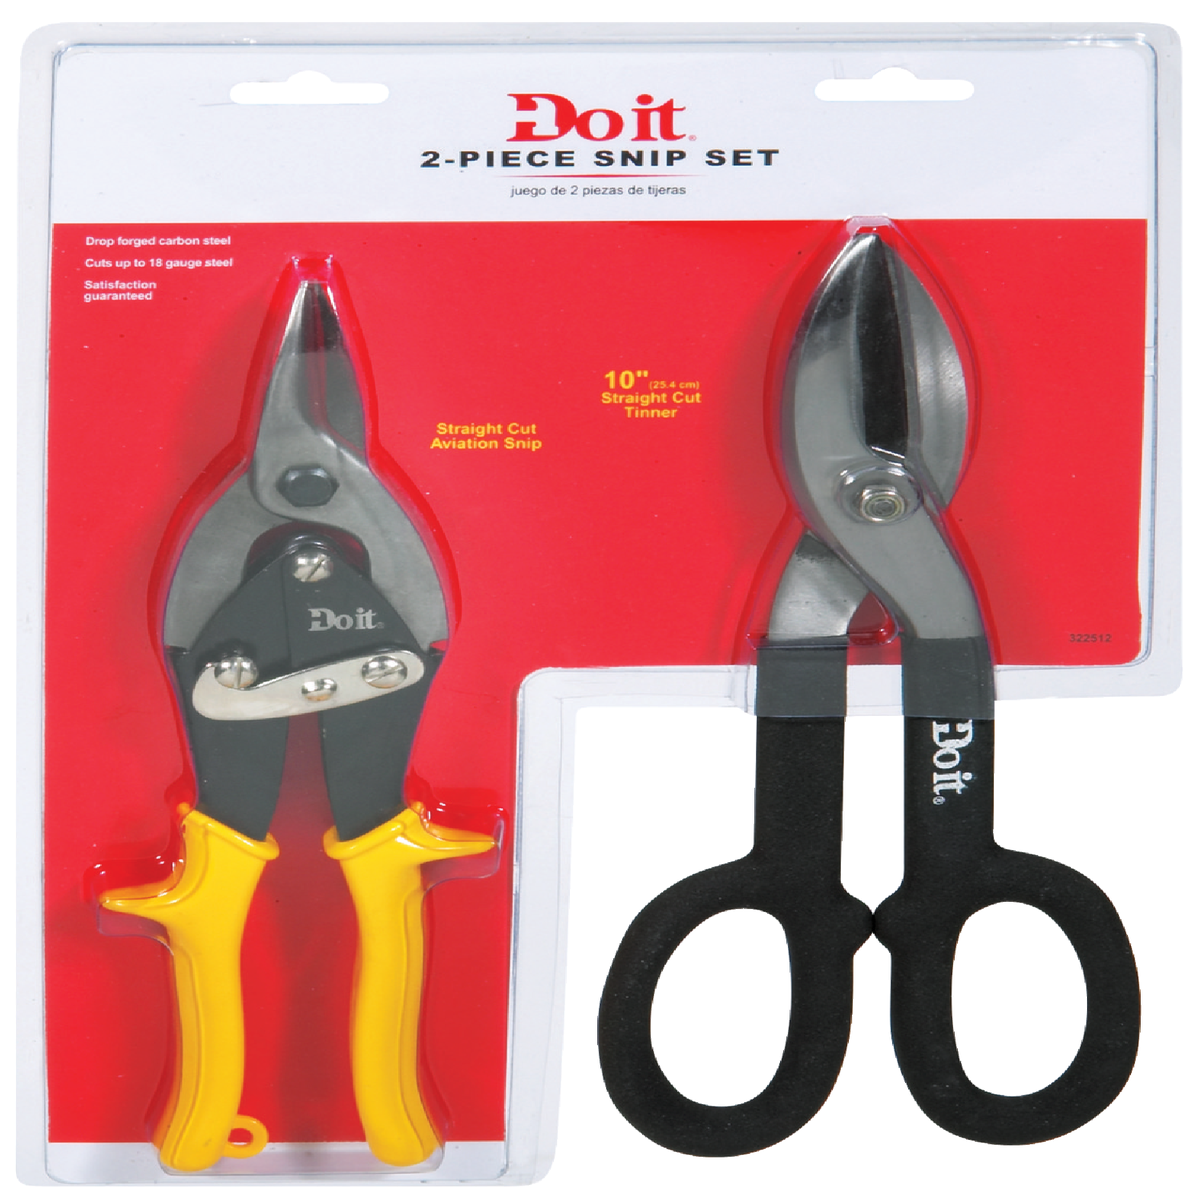 Snips, Nippers & Cutters